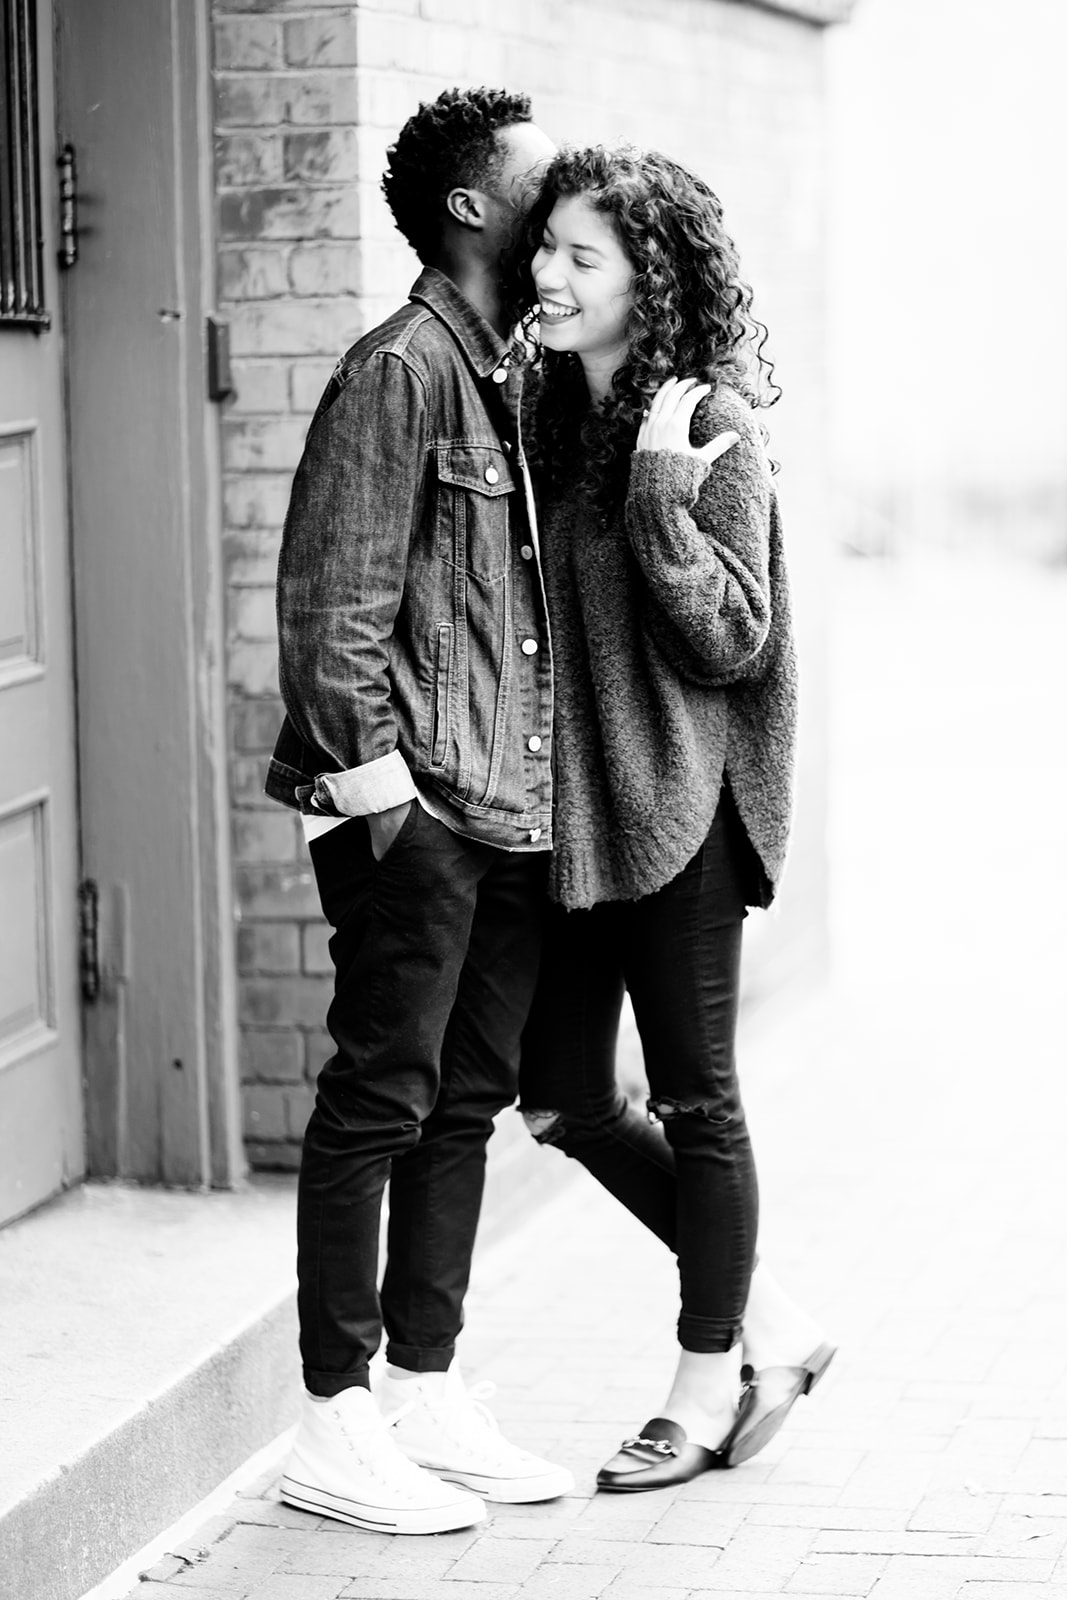 Urban RVA Engagement Shoot with Golden Light - Image Property of www.j-dphoto.com